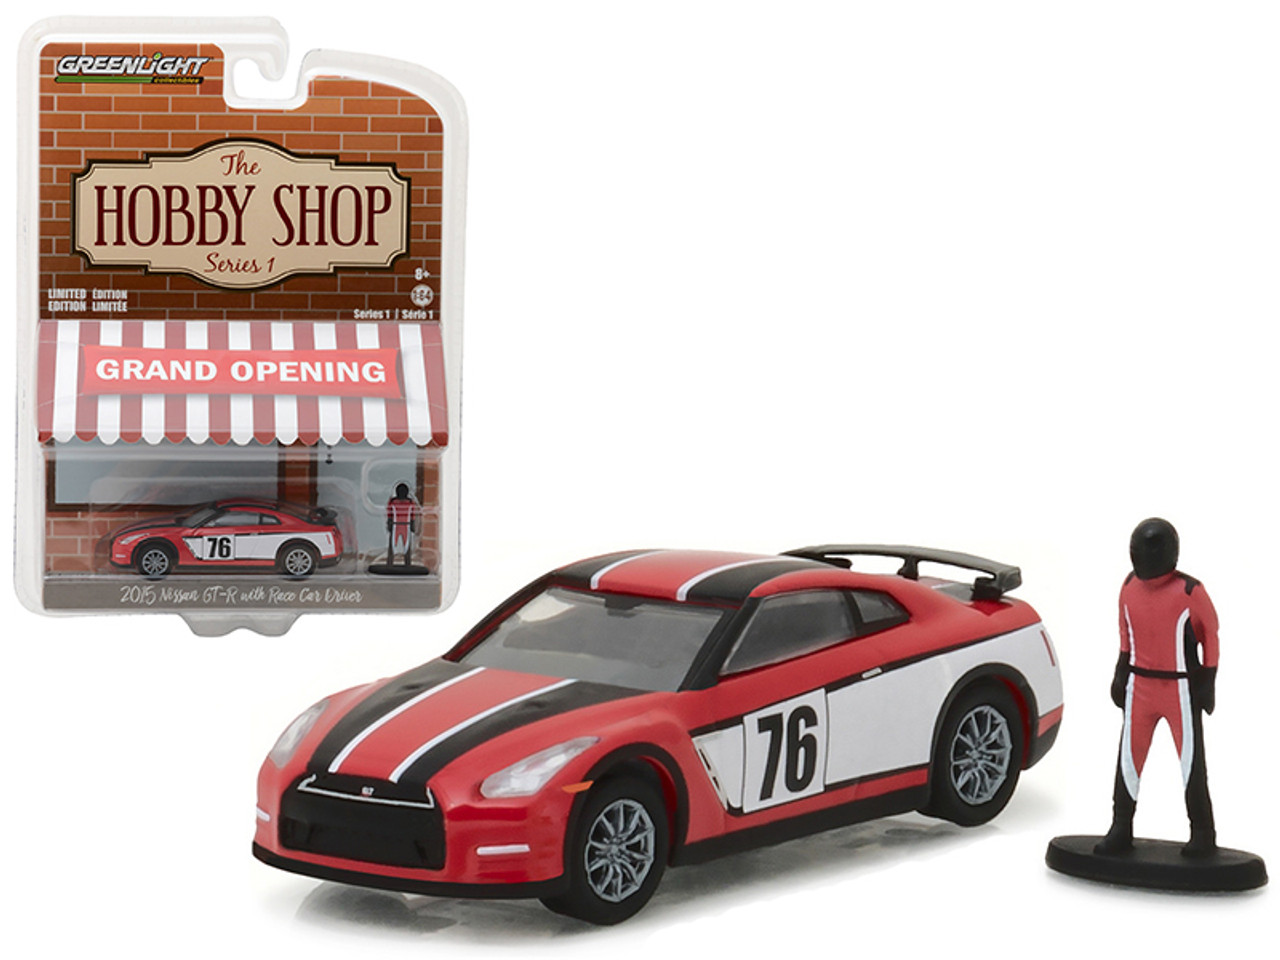 2015 Nissan GT-R R35 Red #76 with Race Car Driver "The Hobby Shop" Series 1 1/64 Diecast Model Car by Greenlight